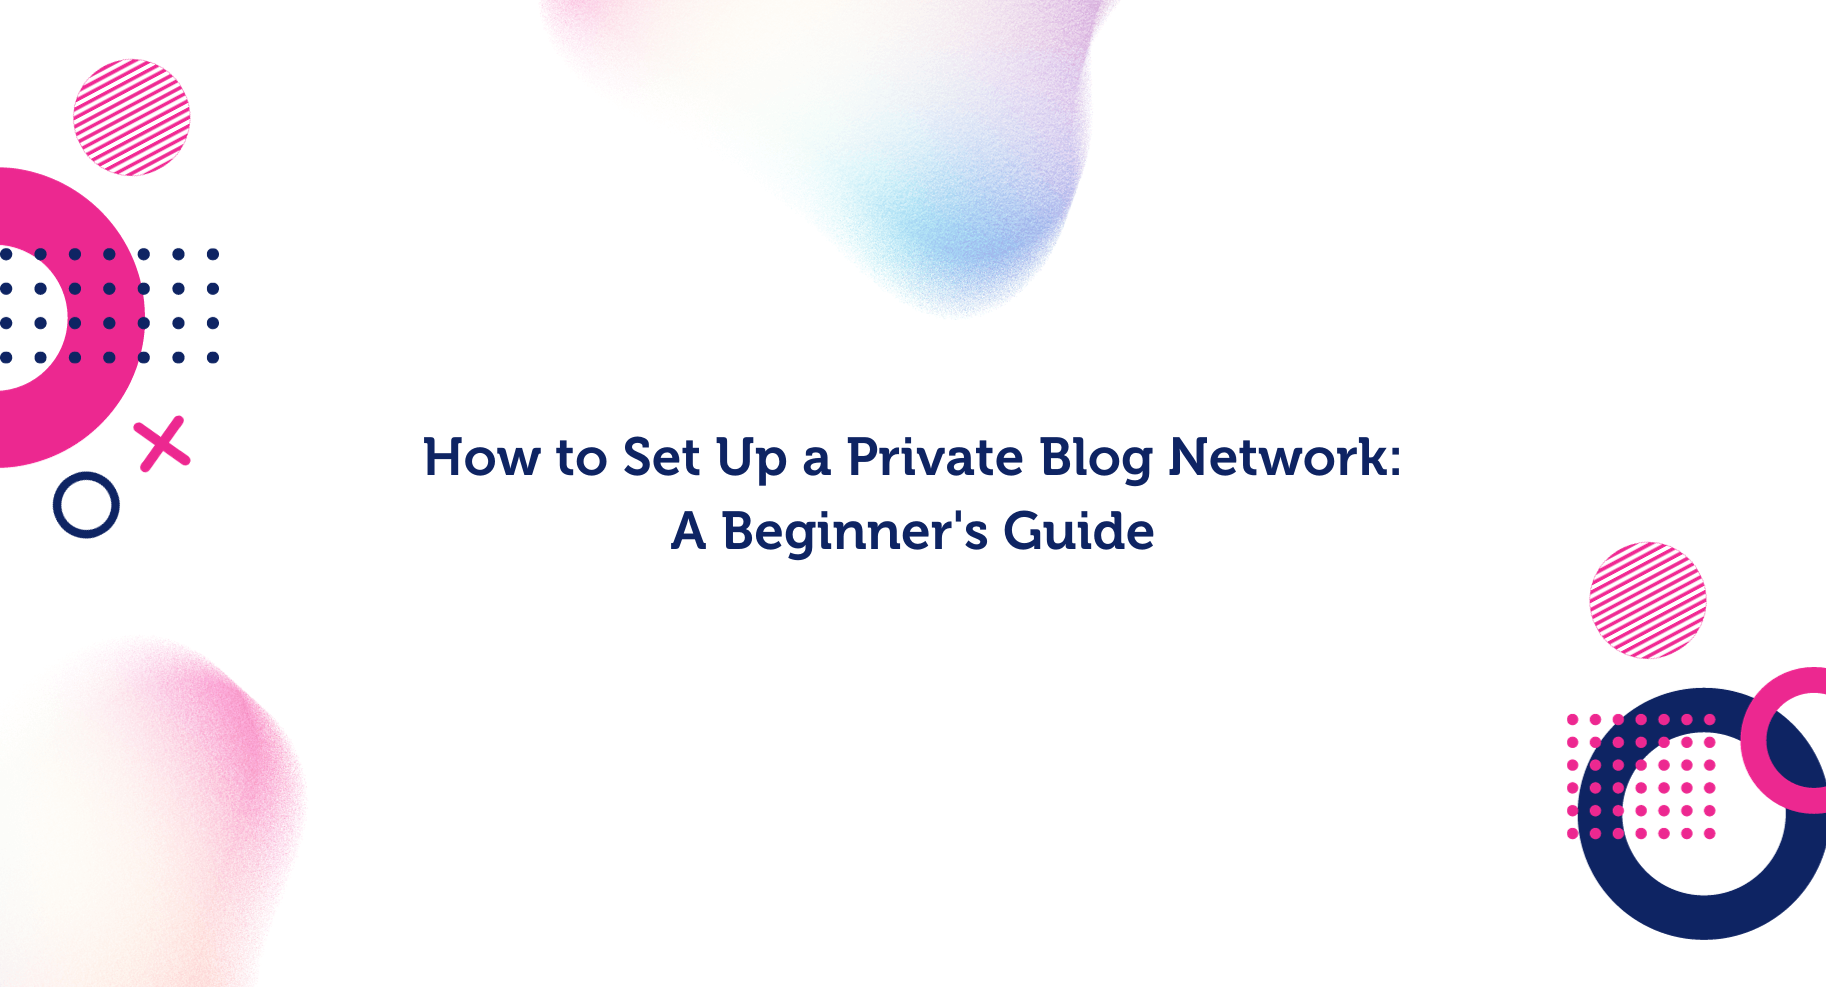 How to Set Up a Private Blog Network: A Beginner's Guide